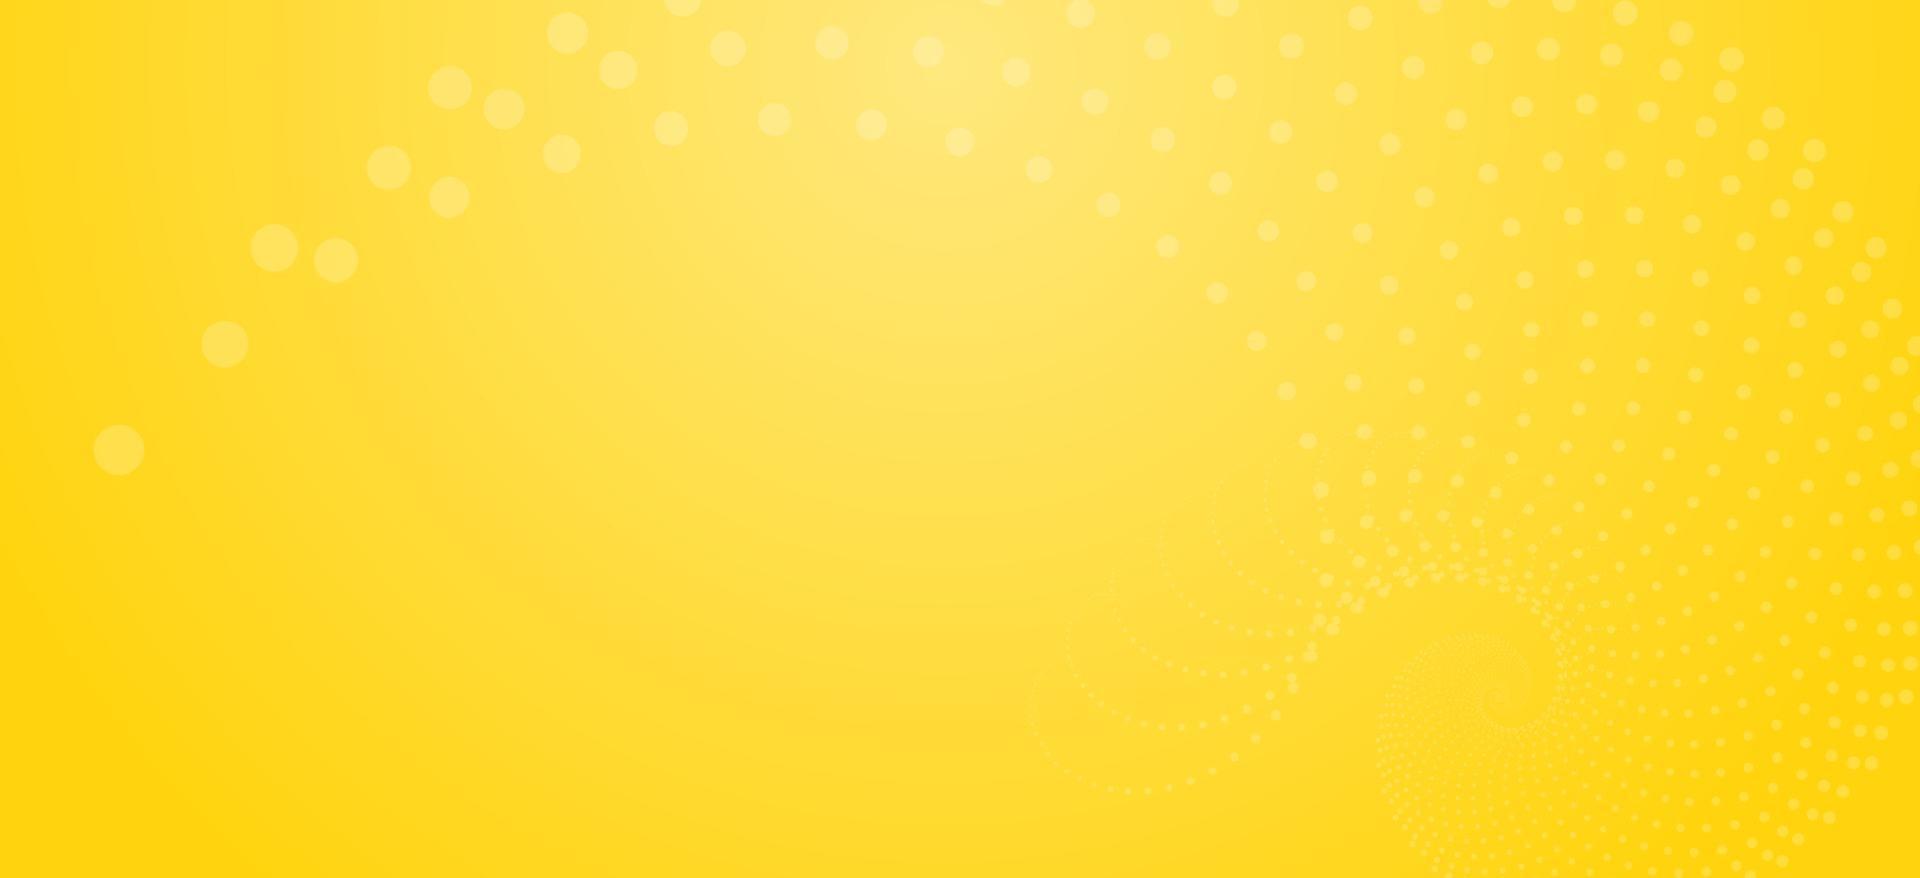 White circular pattern on yellow background vector